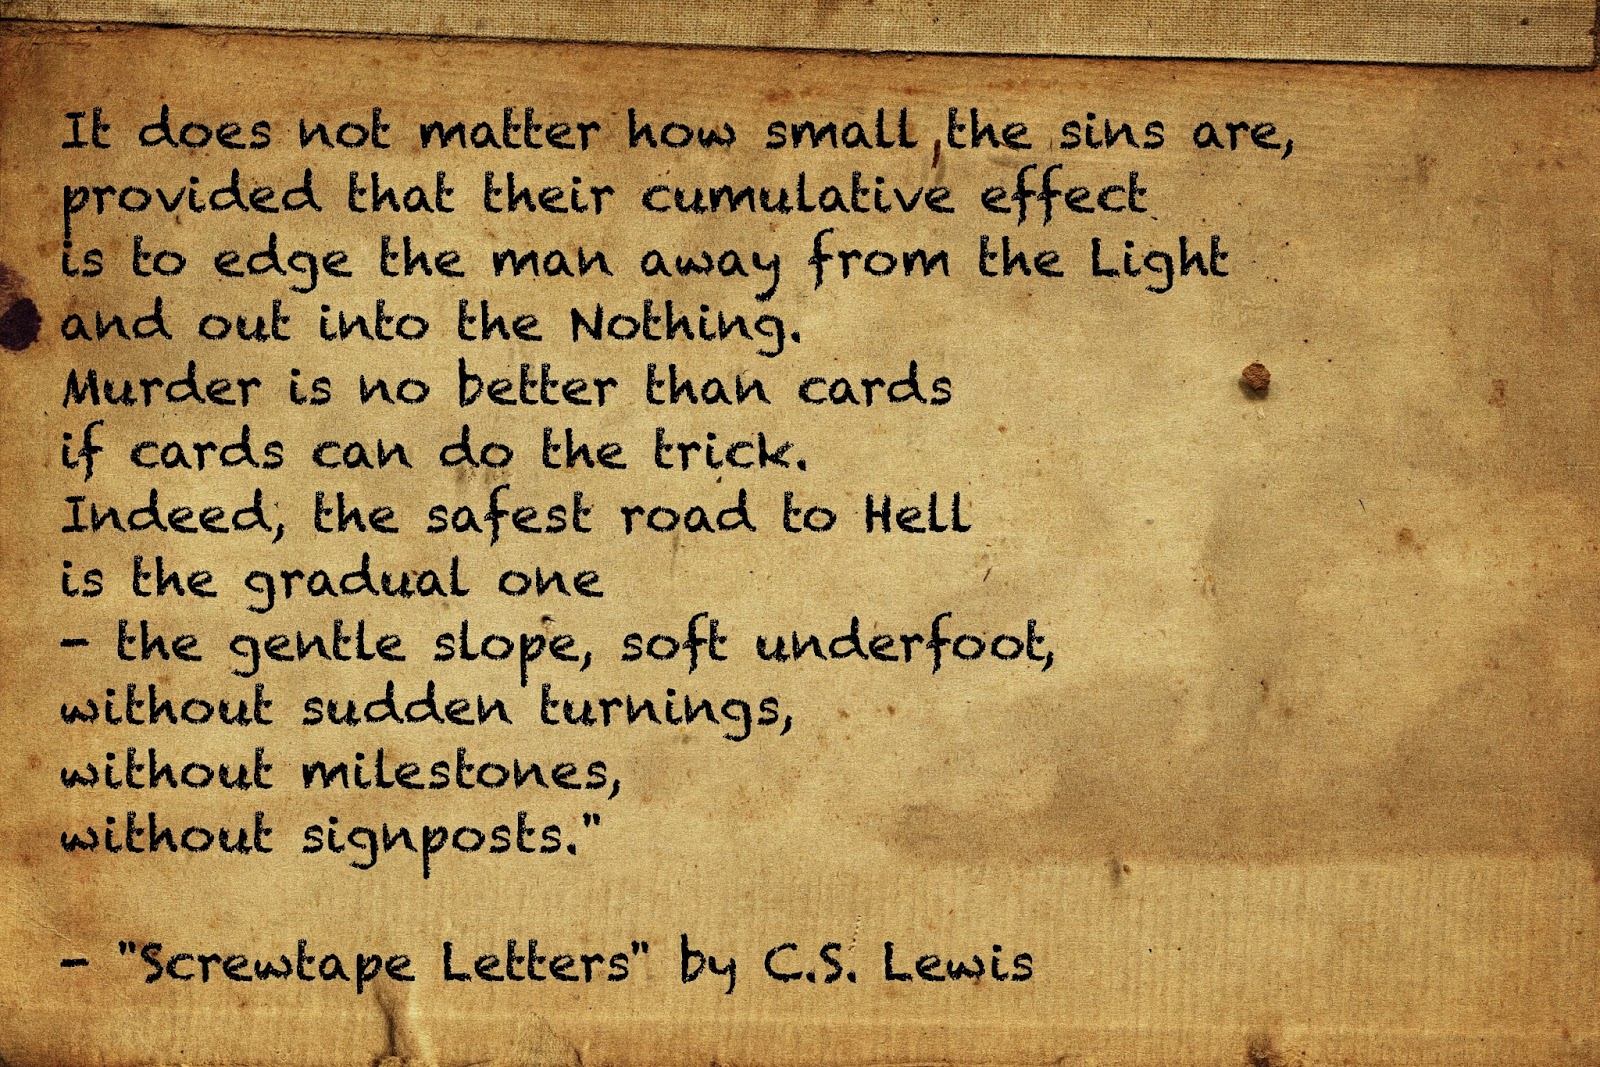 the safest road to hell by c.s. lewis